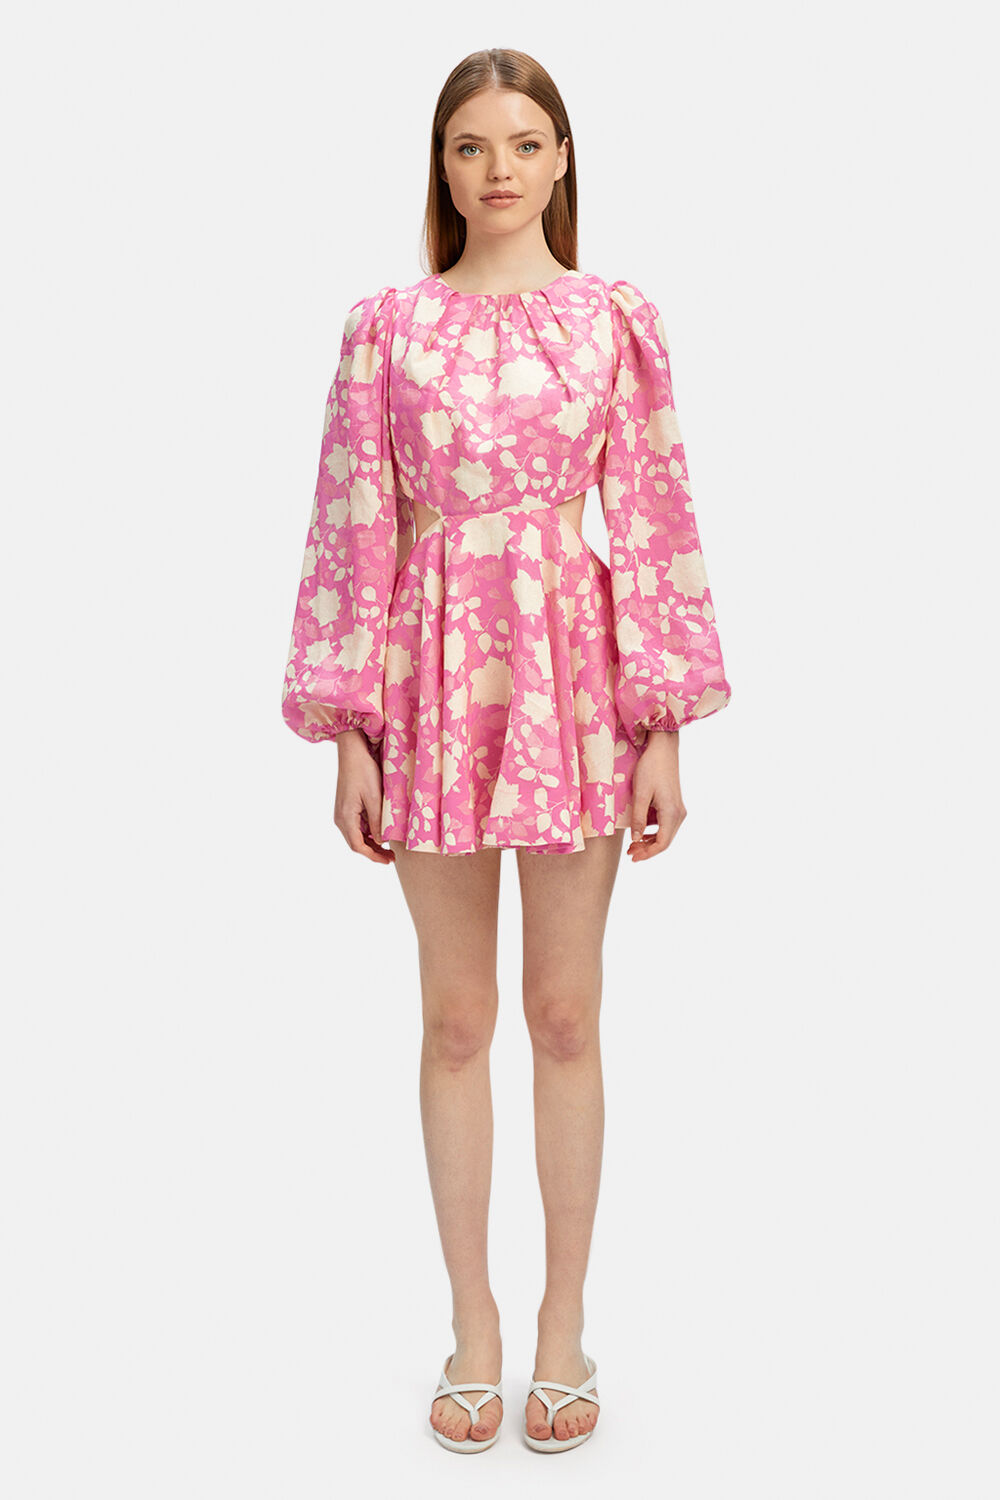 NADA FLORAL MINI DRESS in colour HOT PINK